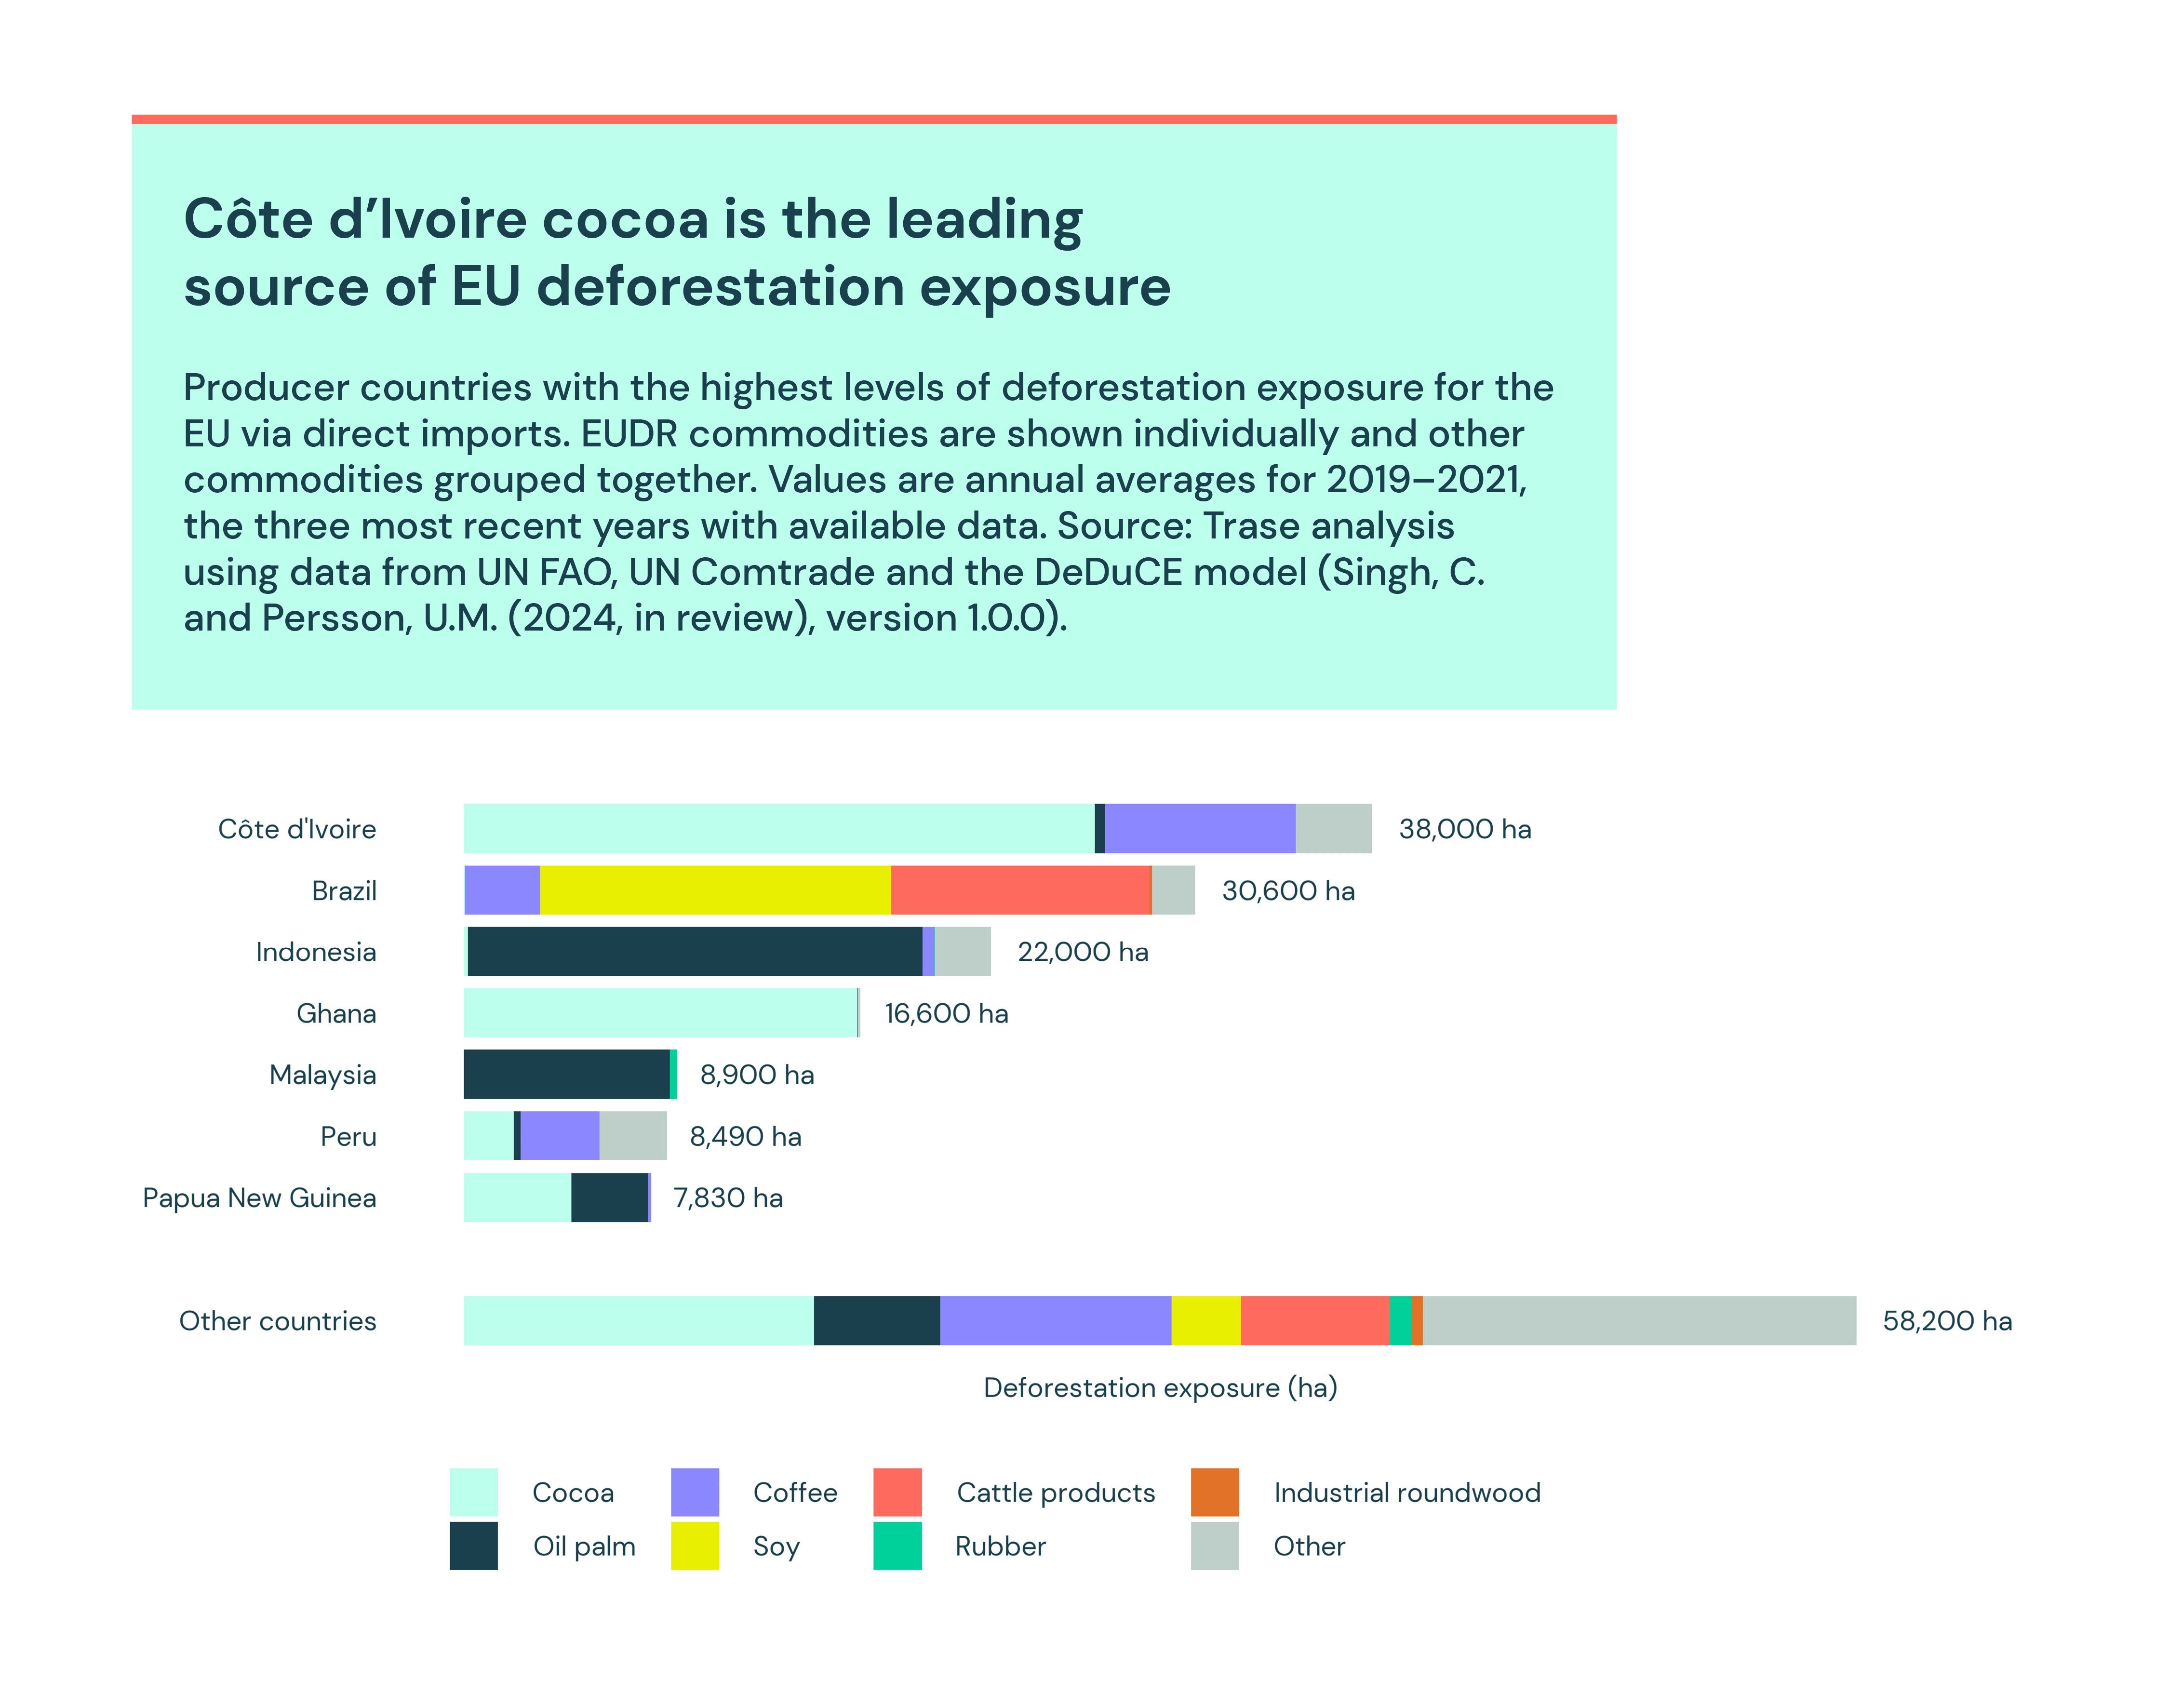 Cote d'ivoire cocoa is the leading source of EU deforestation. Producer countries with the highest levels of deforestation exposure for the EU via direct imports. EUDR commodities are shown individually and other commodities grouped together. Values are annual averages for 2019–2021, the three most recent years with available data. 